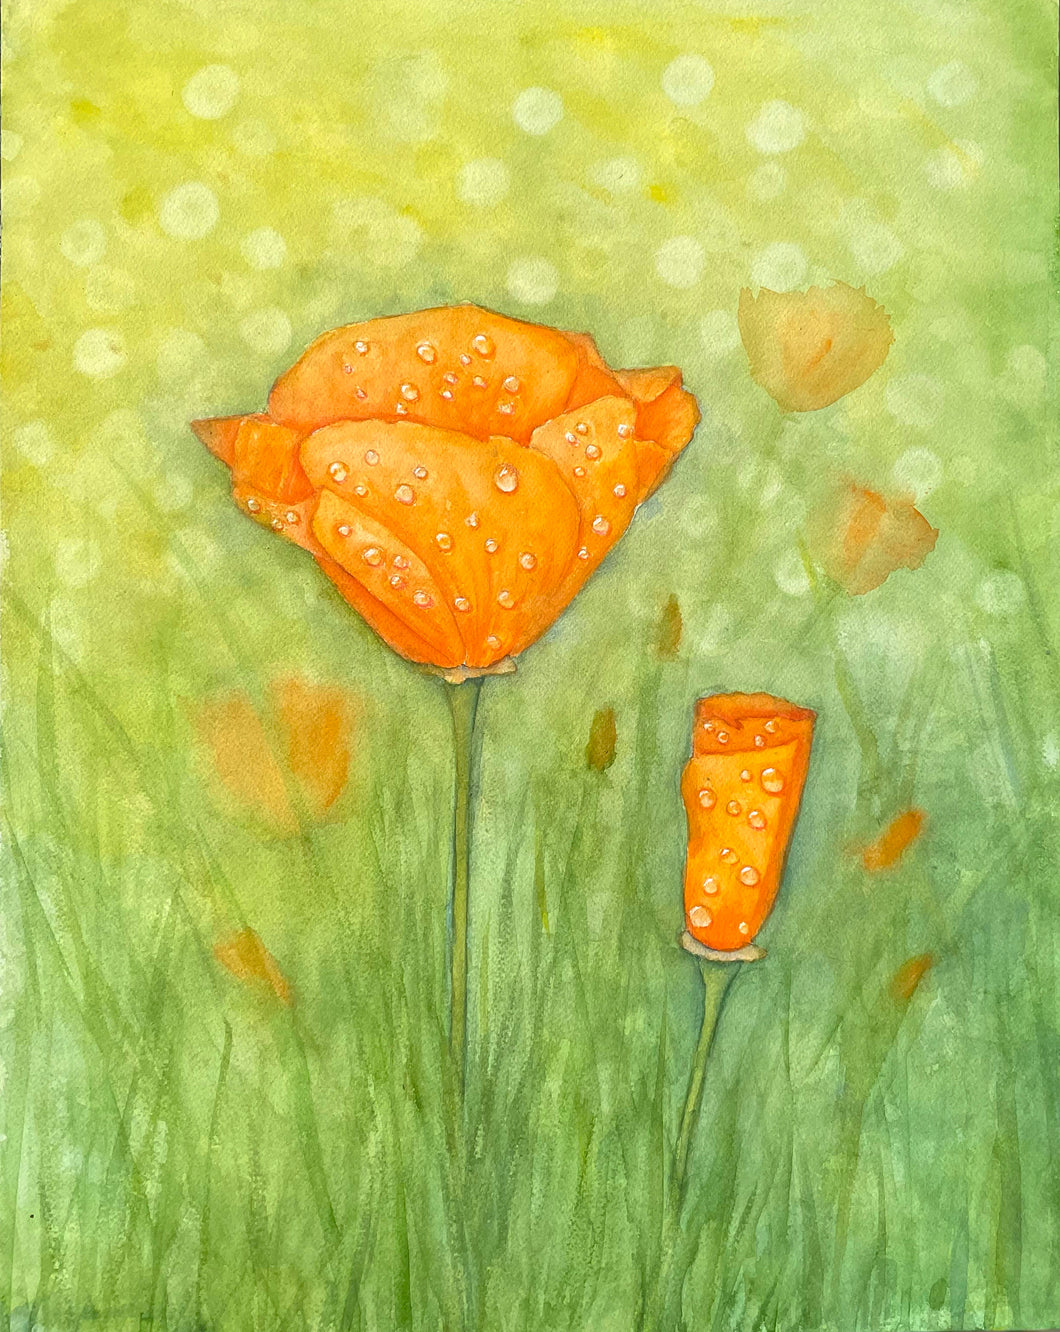 Golden Poppies in the Rain Watercolor 16x20 Painting, Prints, and Cards